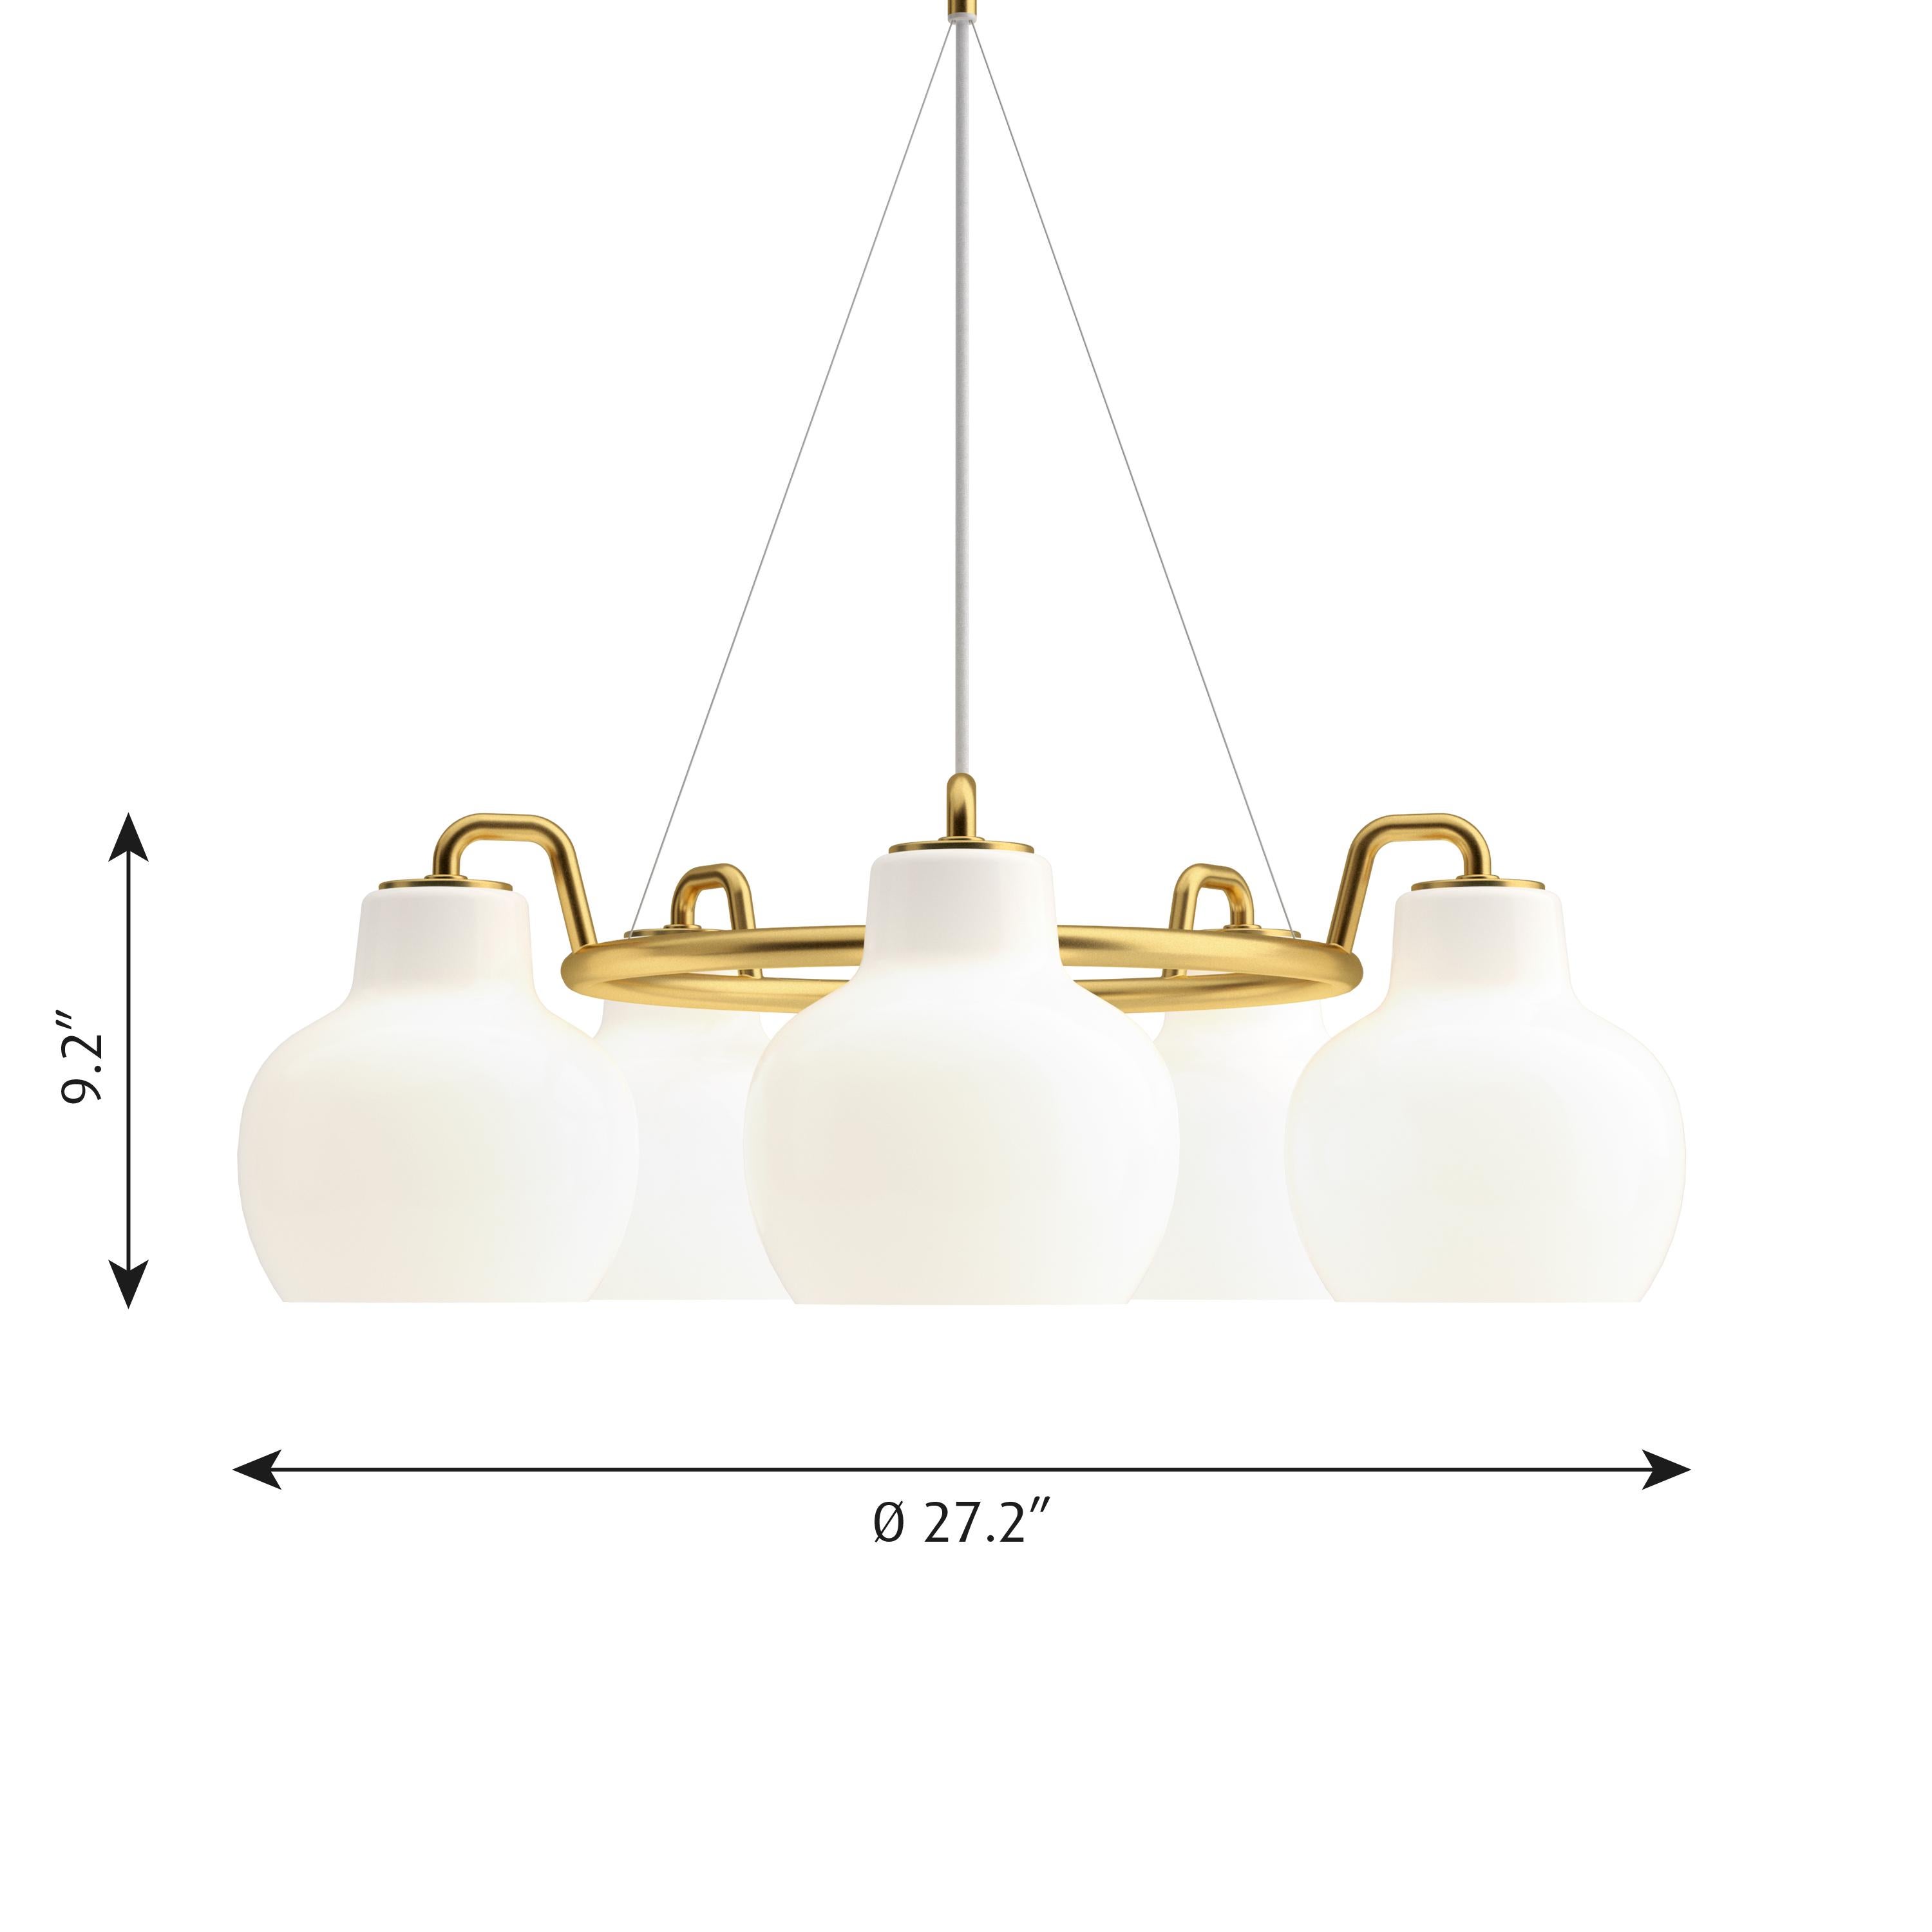 Vilhelm Lauritzen 5-shade brass and glass ring chandelier for Louis Poulsen. Executed in five hand blown glossy white opal glass and untreated polished brass tube and ceiling canopy. The chandelier emits light directed primarily downwards. The opal